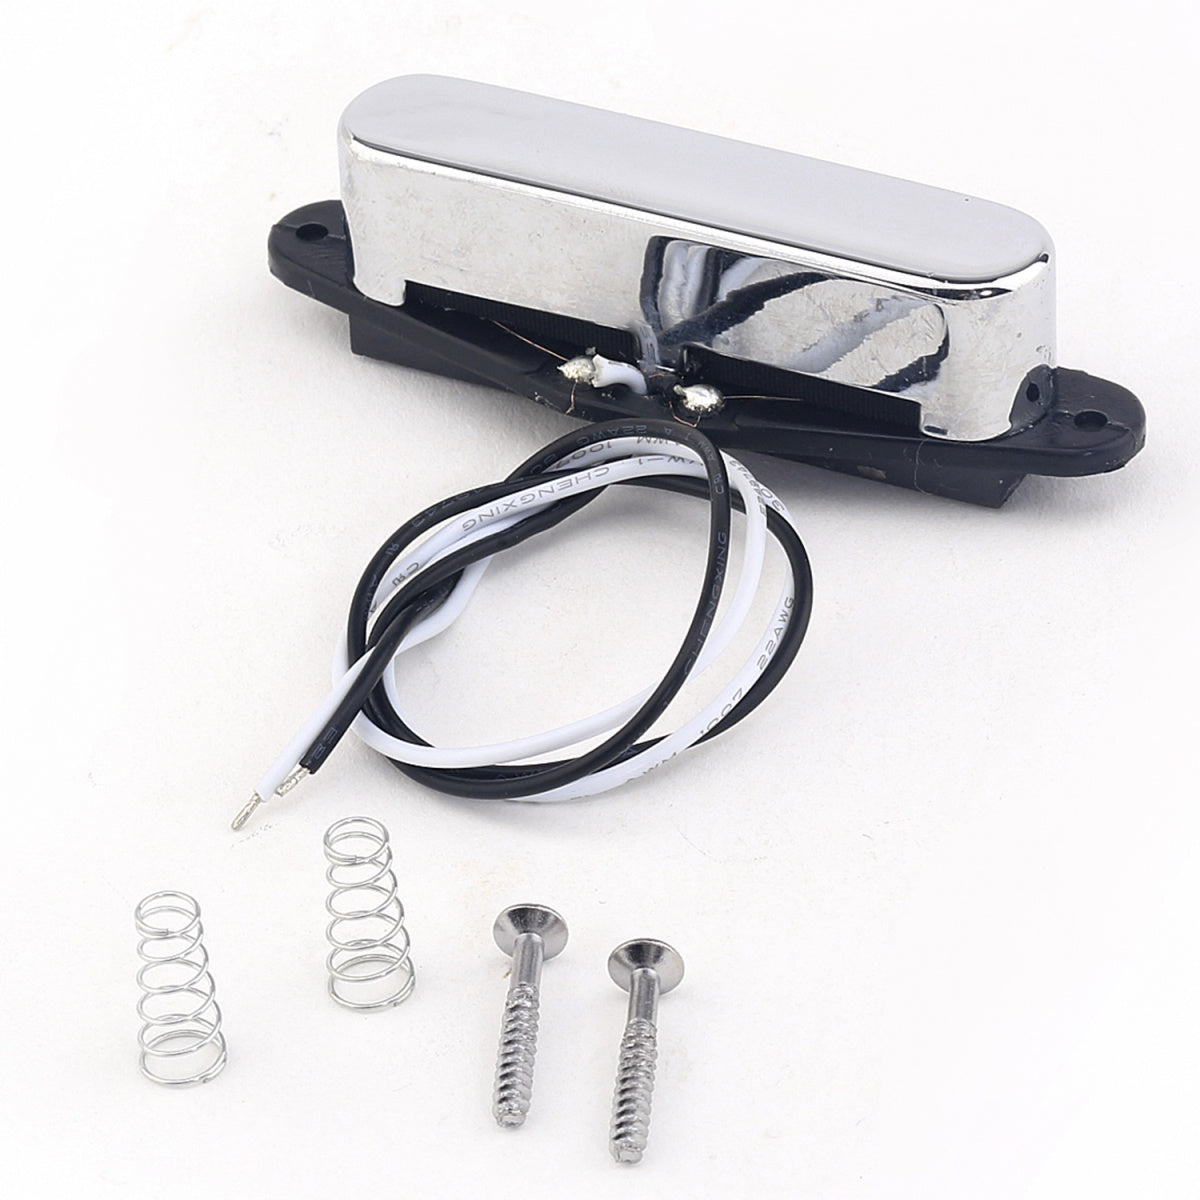 Musiclily Pro 50mm Single Coil Pickup for Telecaster Tele Guitar Neck, Chrome